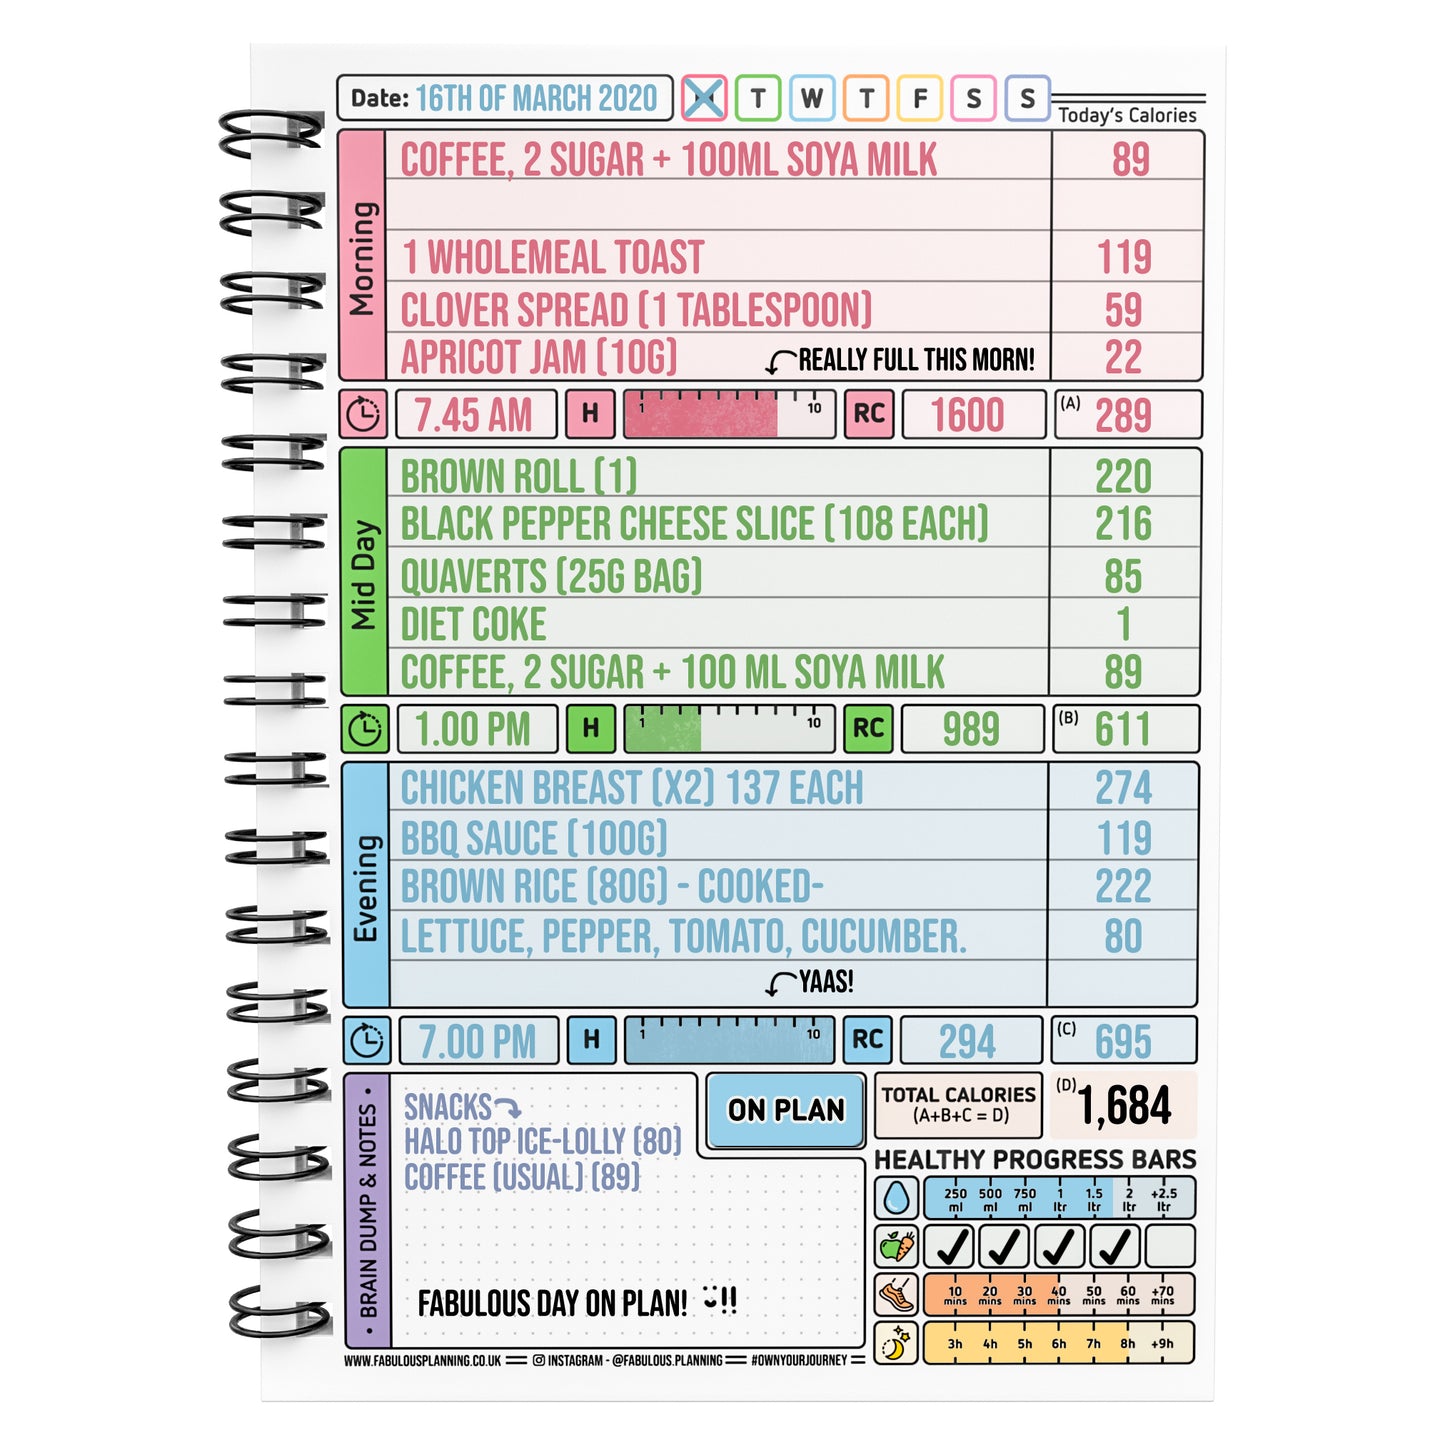 Food Diary - C52 - Calorie Counting